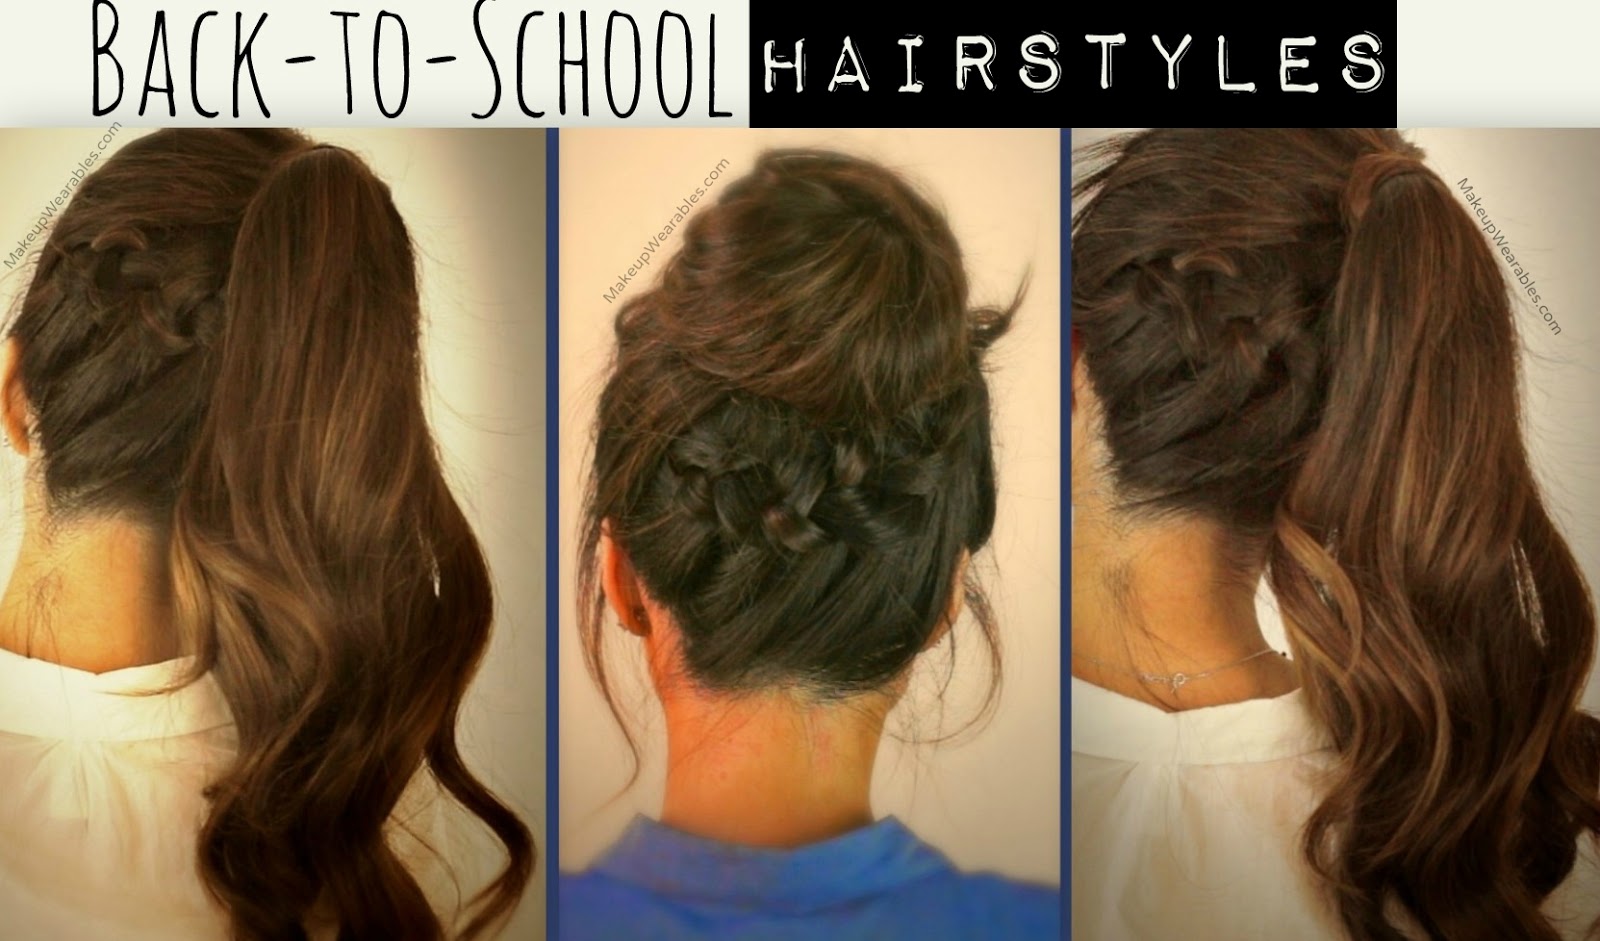 These hair styles are not just for elementary, middle, high school, or ...